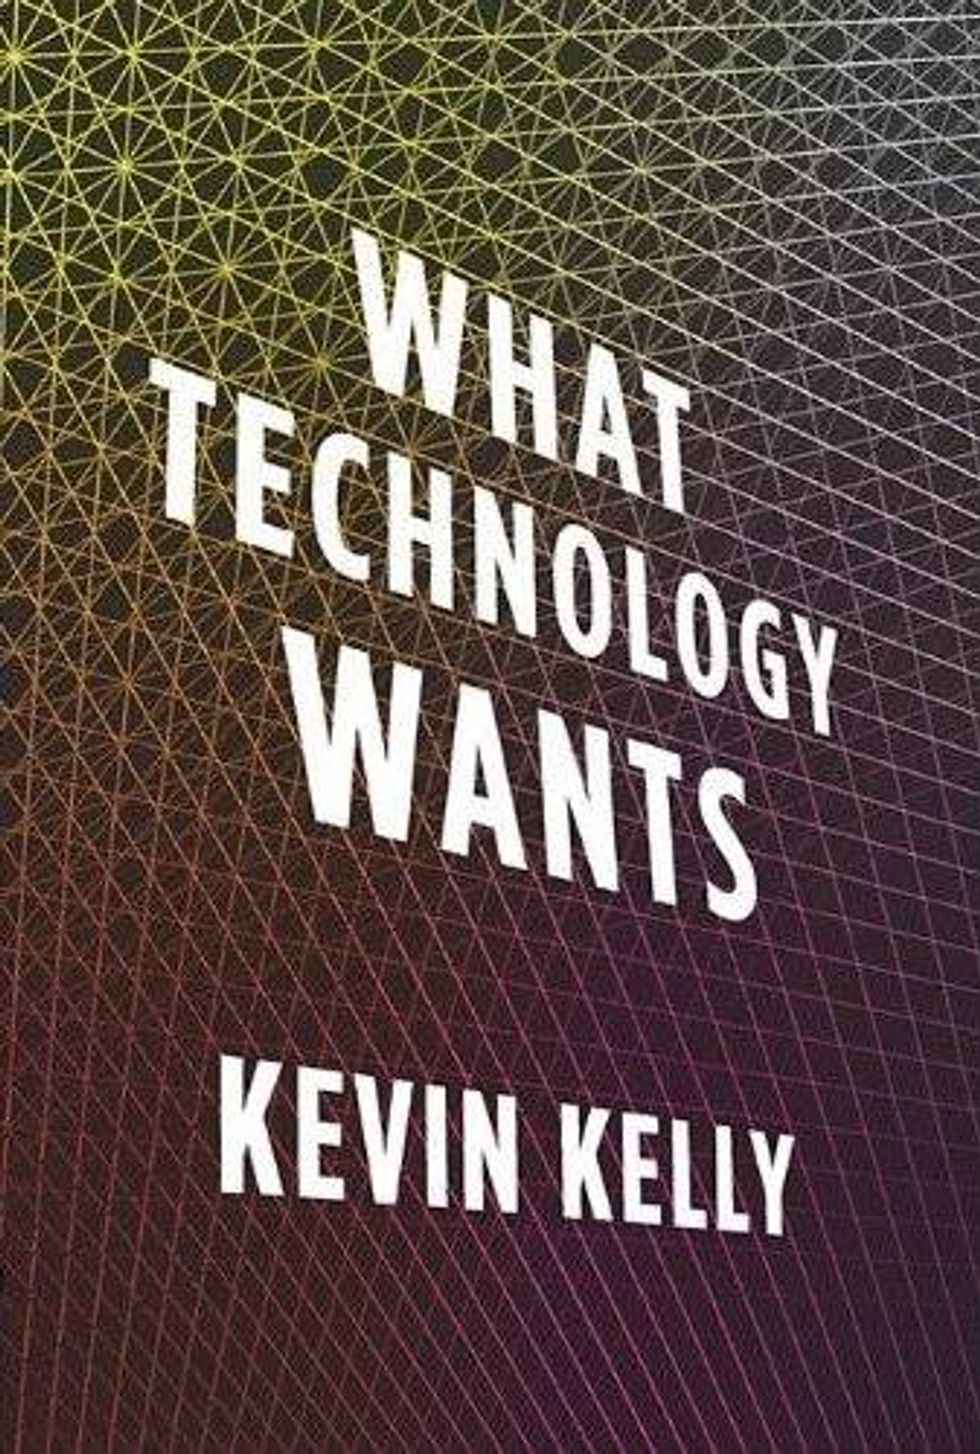 Wired Co-Founder Kevin Kelly on 'What Technology Wants'